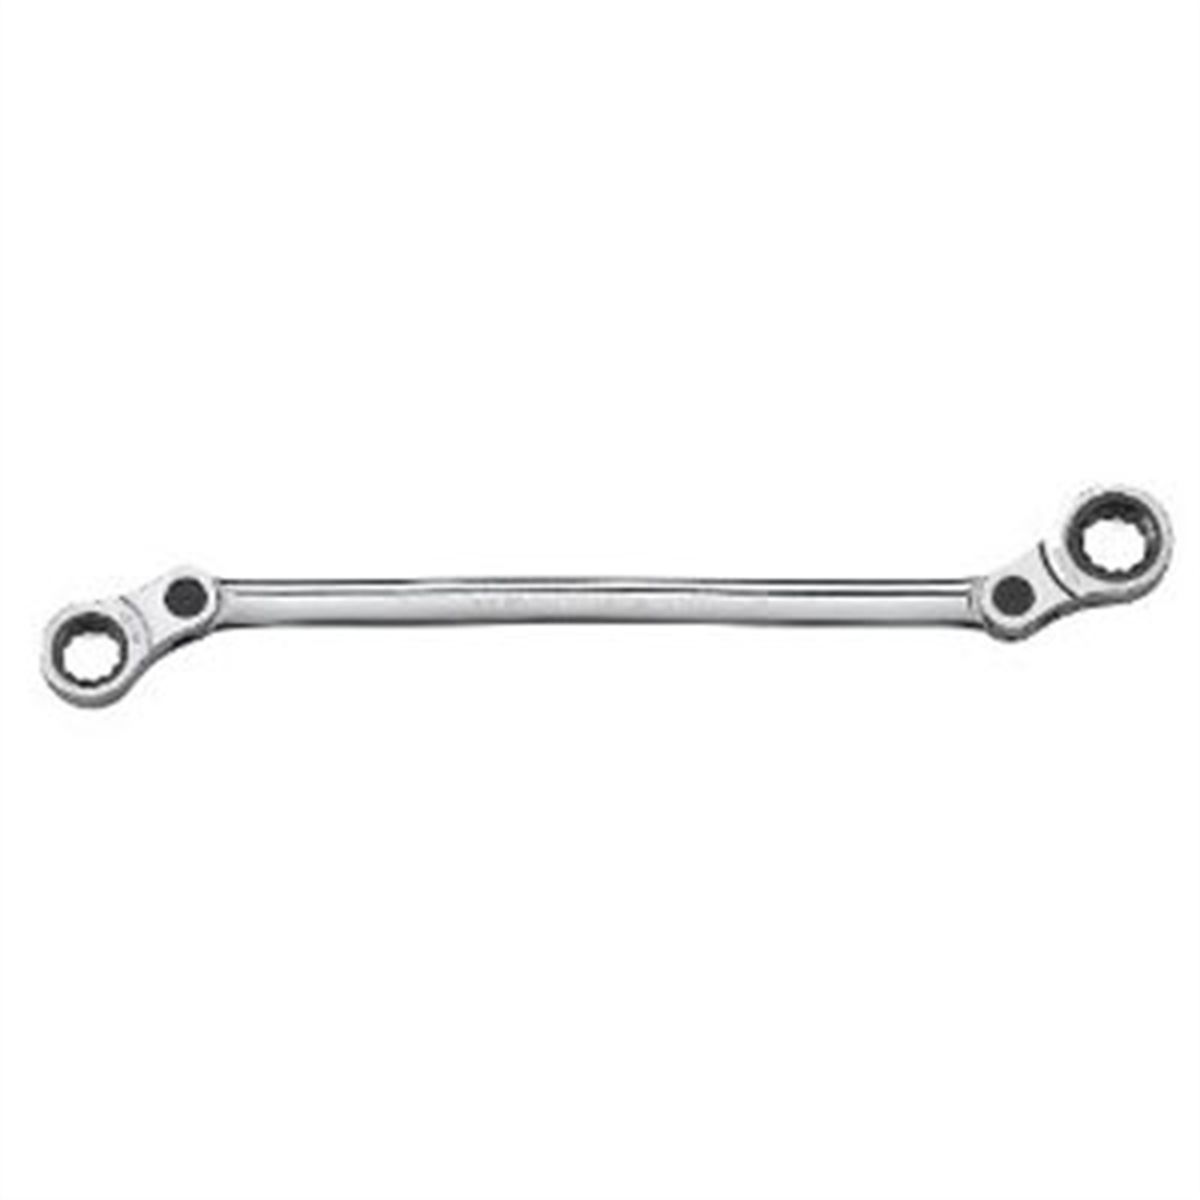 Index Double Box Ratchet Wrench 13mm x 14mm